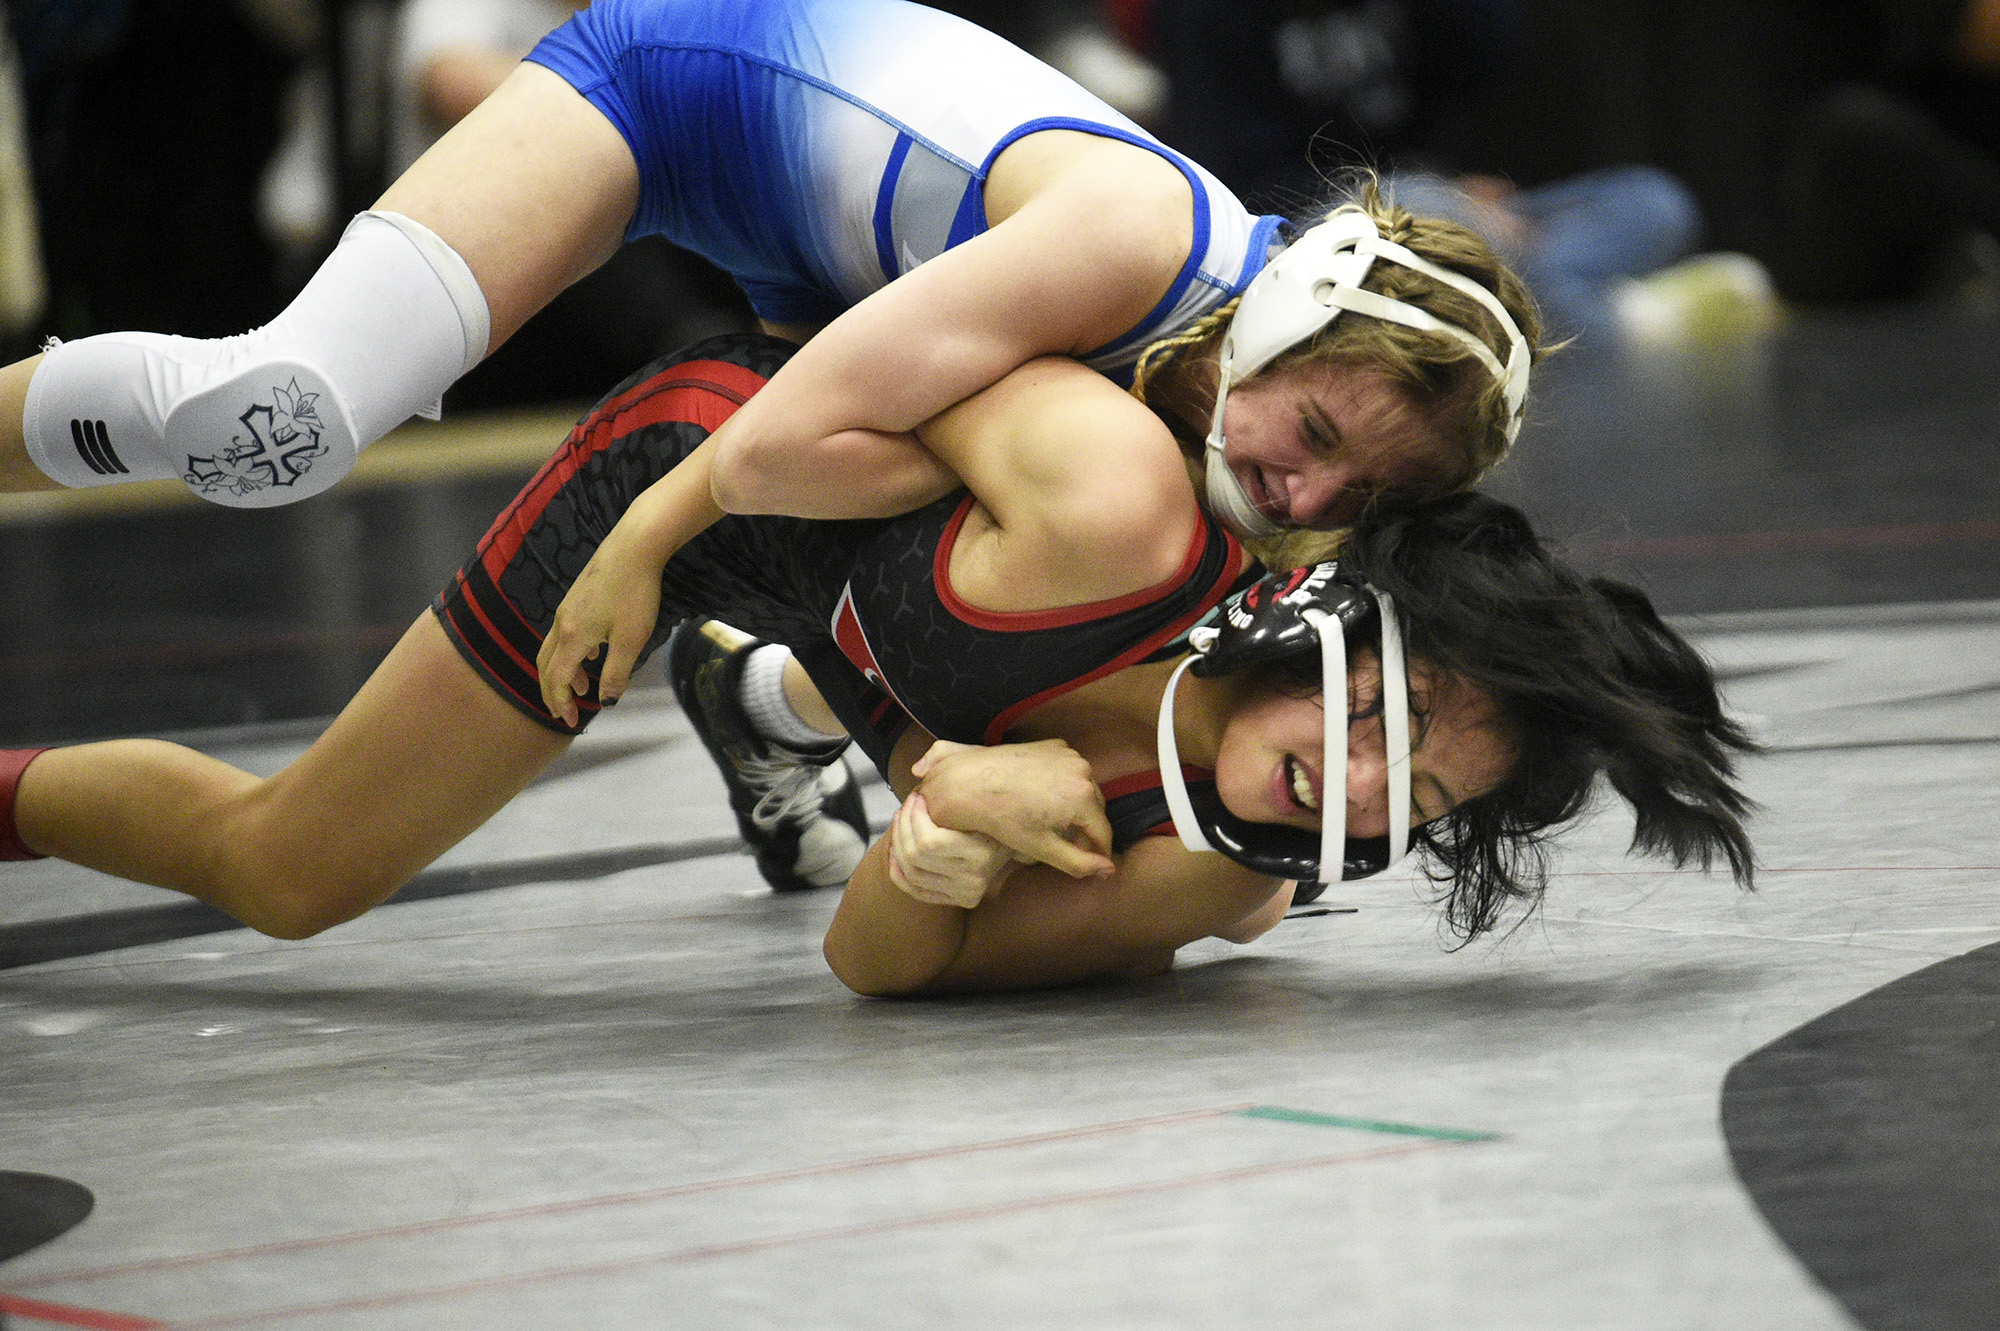 Leah Wallway of La Center (top) wrestles Jasmine Cha of Camas in the girls final at 105 pounds at the 53rd annual Norm Friehauf Clark County Championships wrestling tournament at Union High School on Saturday, Jan. 27, 2024.